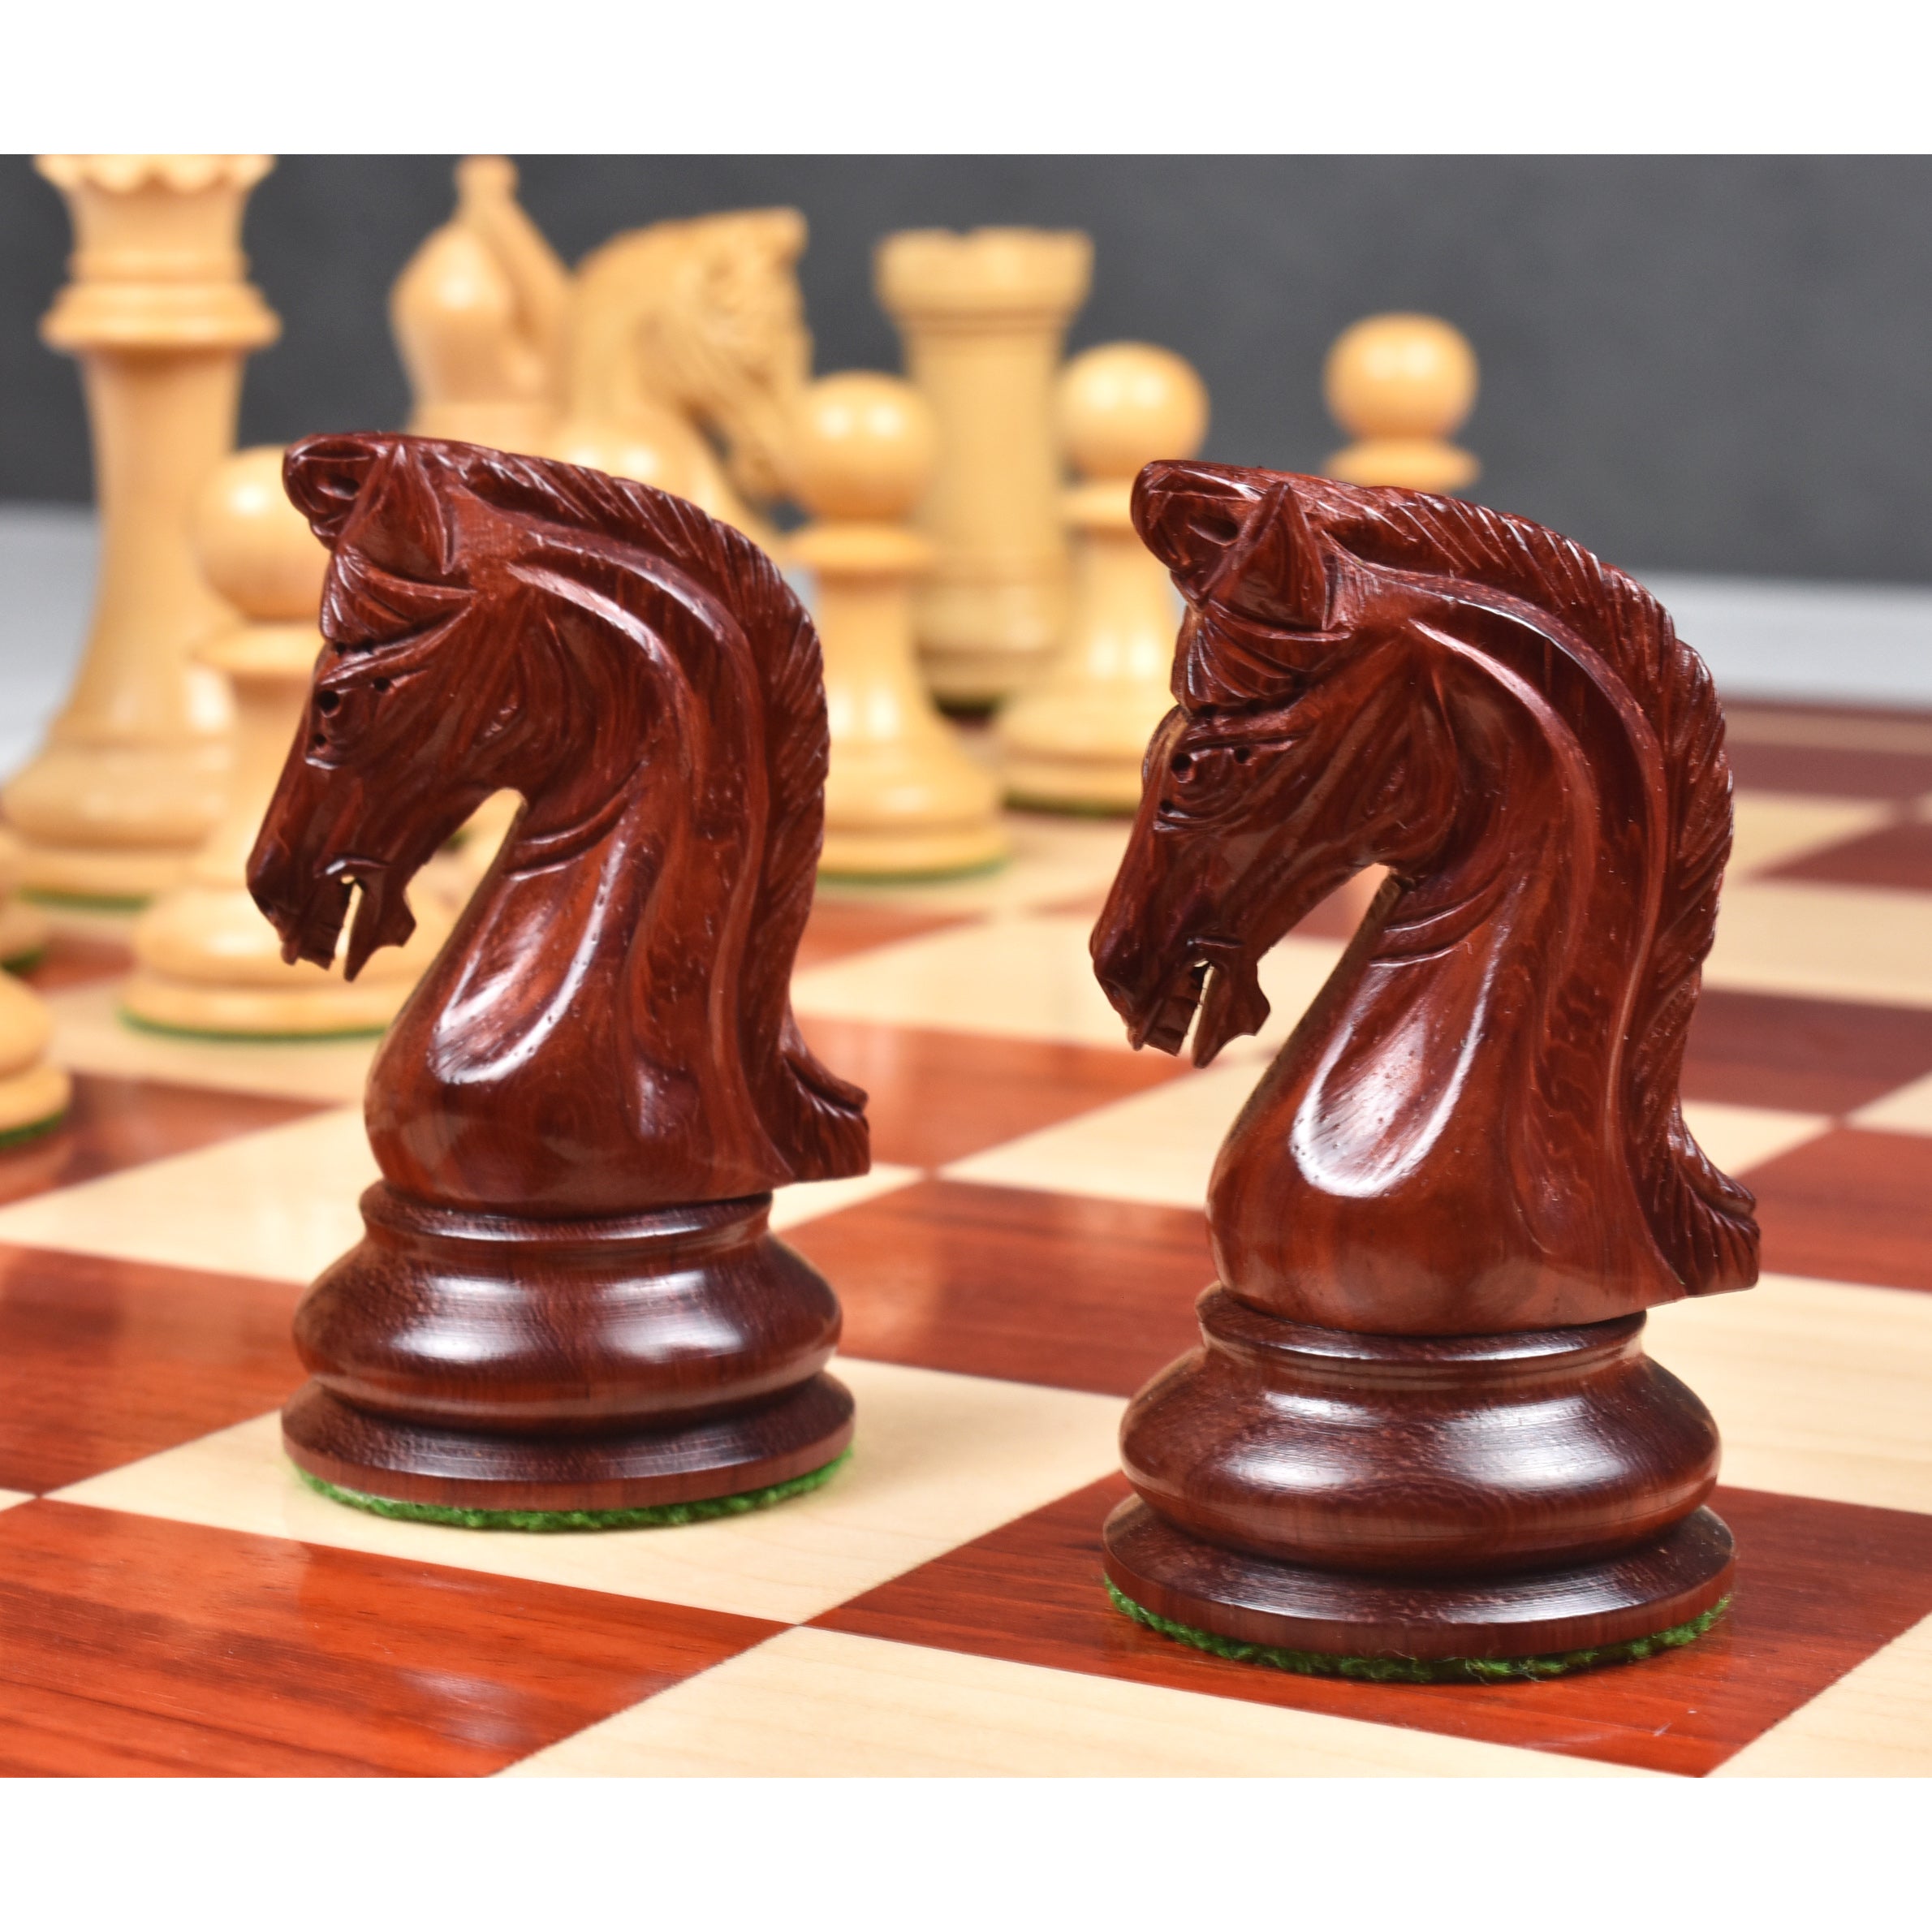 Slightly Imperfect Repro 2016 Sinquefield Staunton Chess Pieces Only Set-Bud Rosewood-Triple Weight